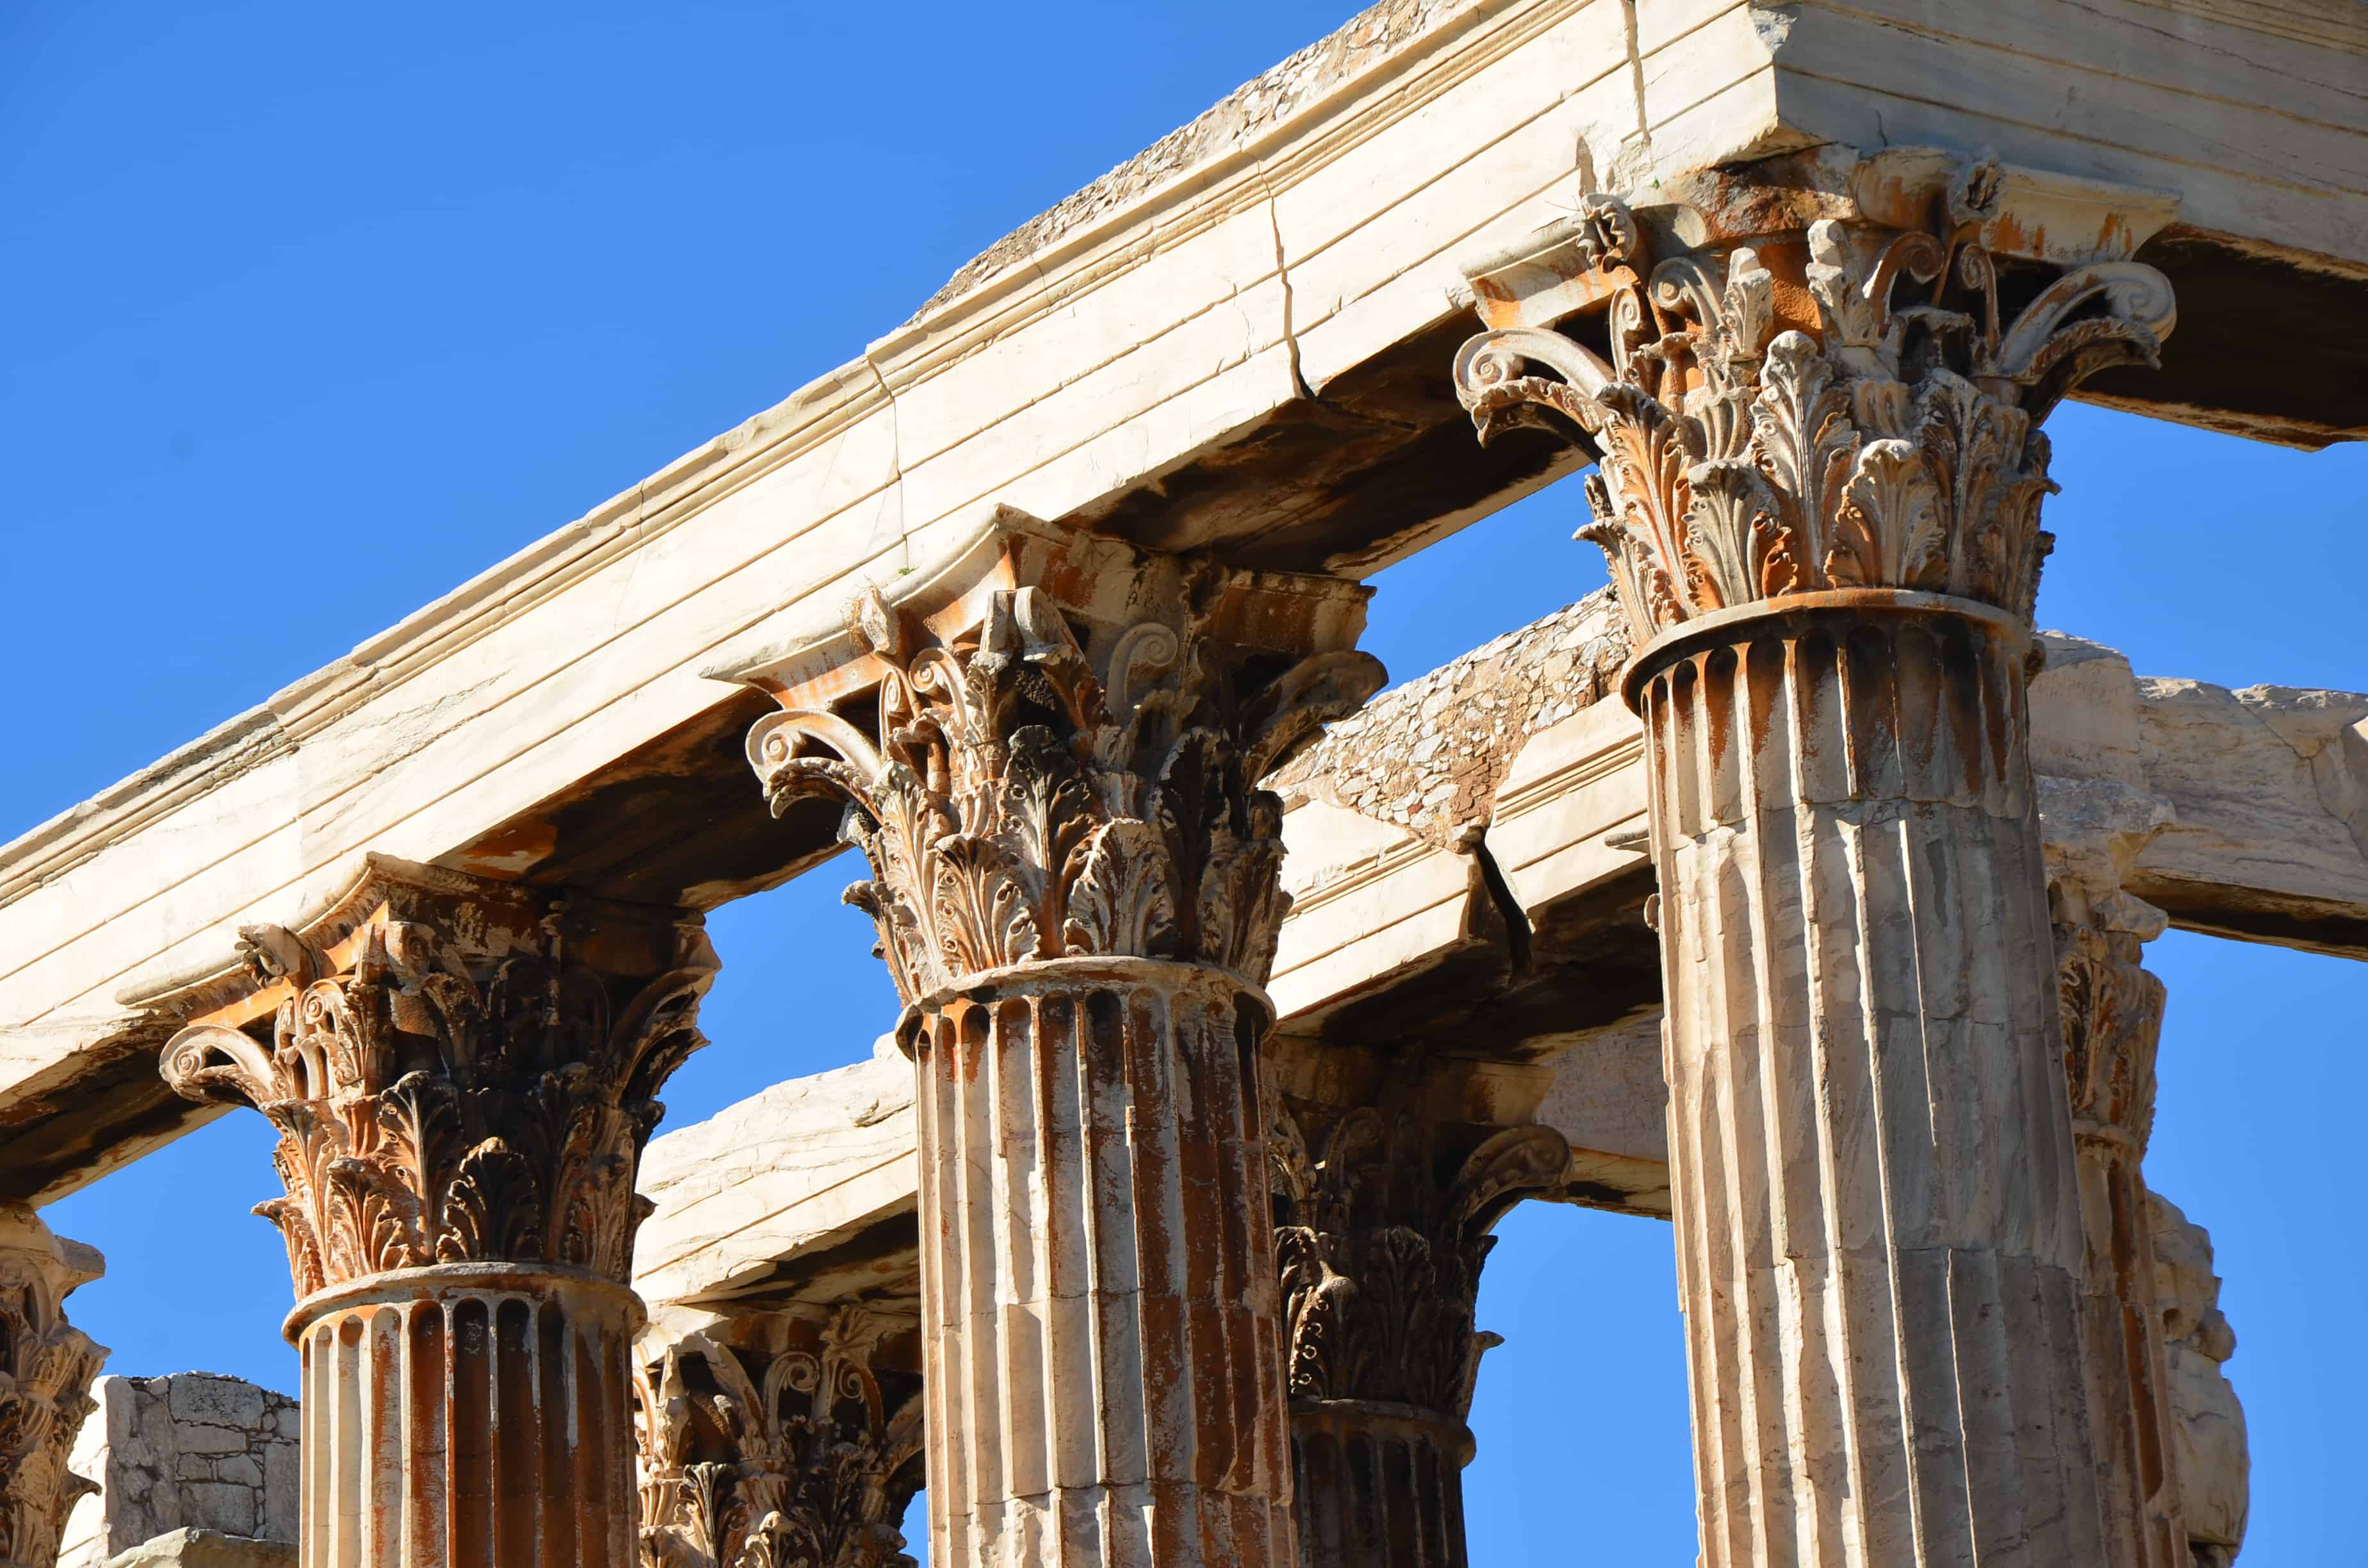 Corinthian column capitals on the Temple of Olympian Zeus in Athens, Greece